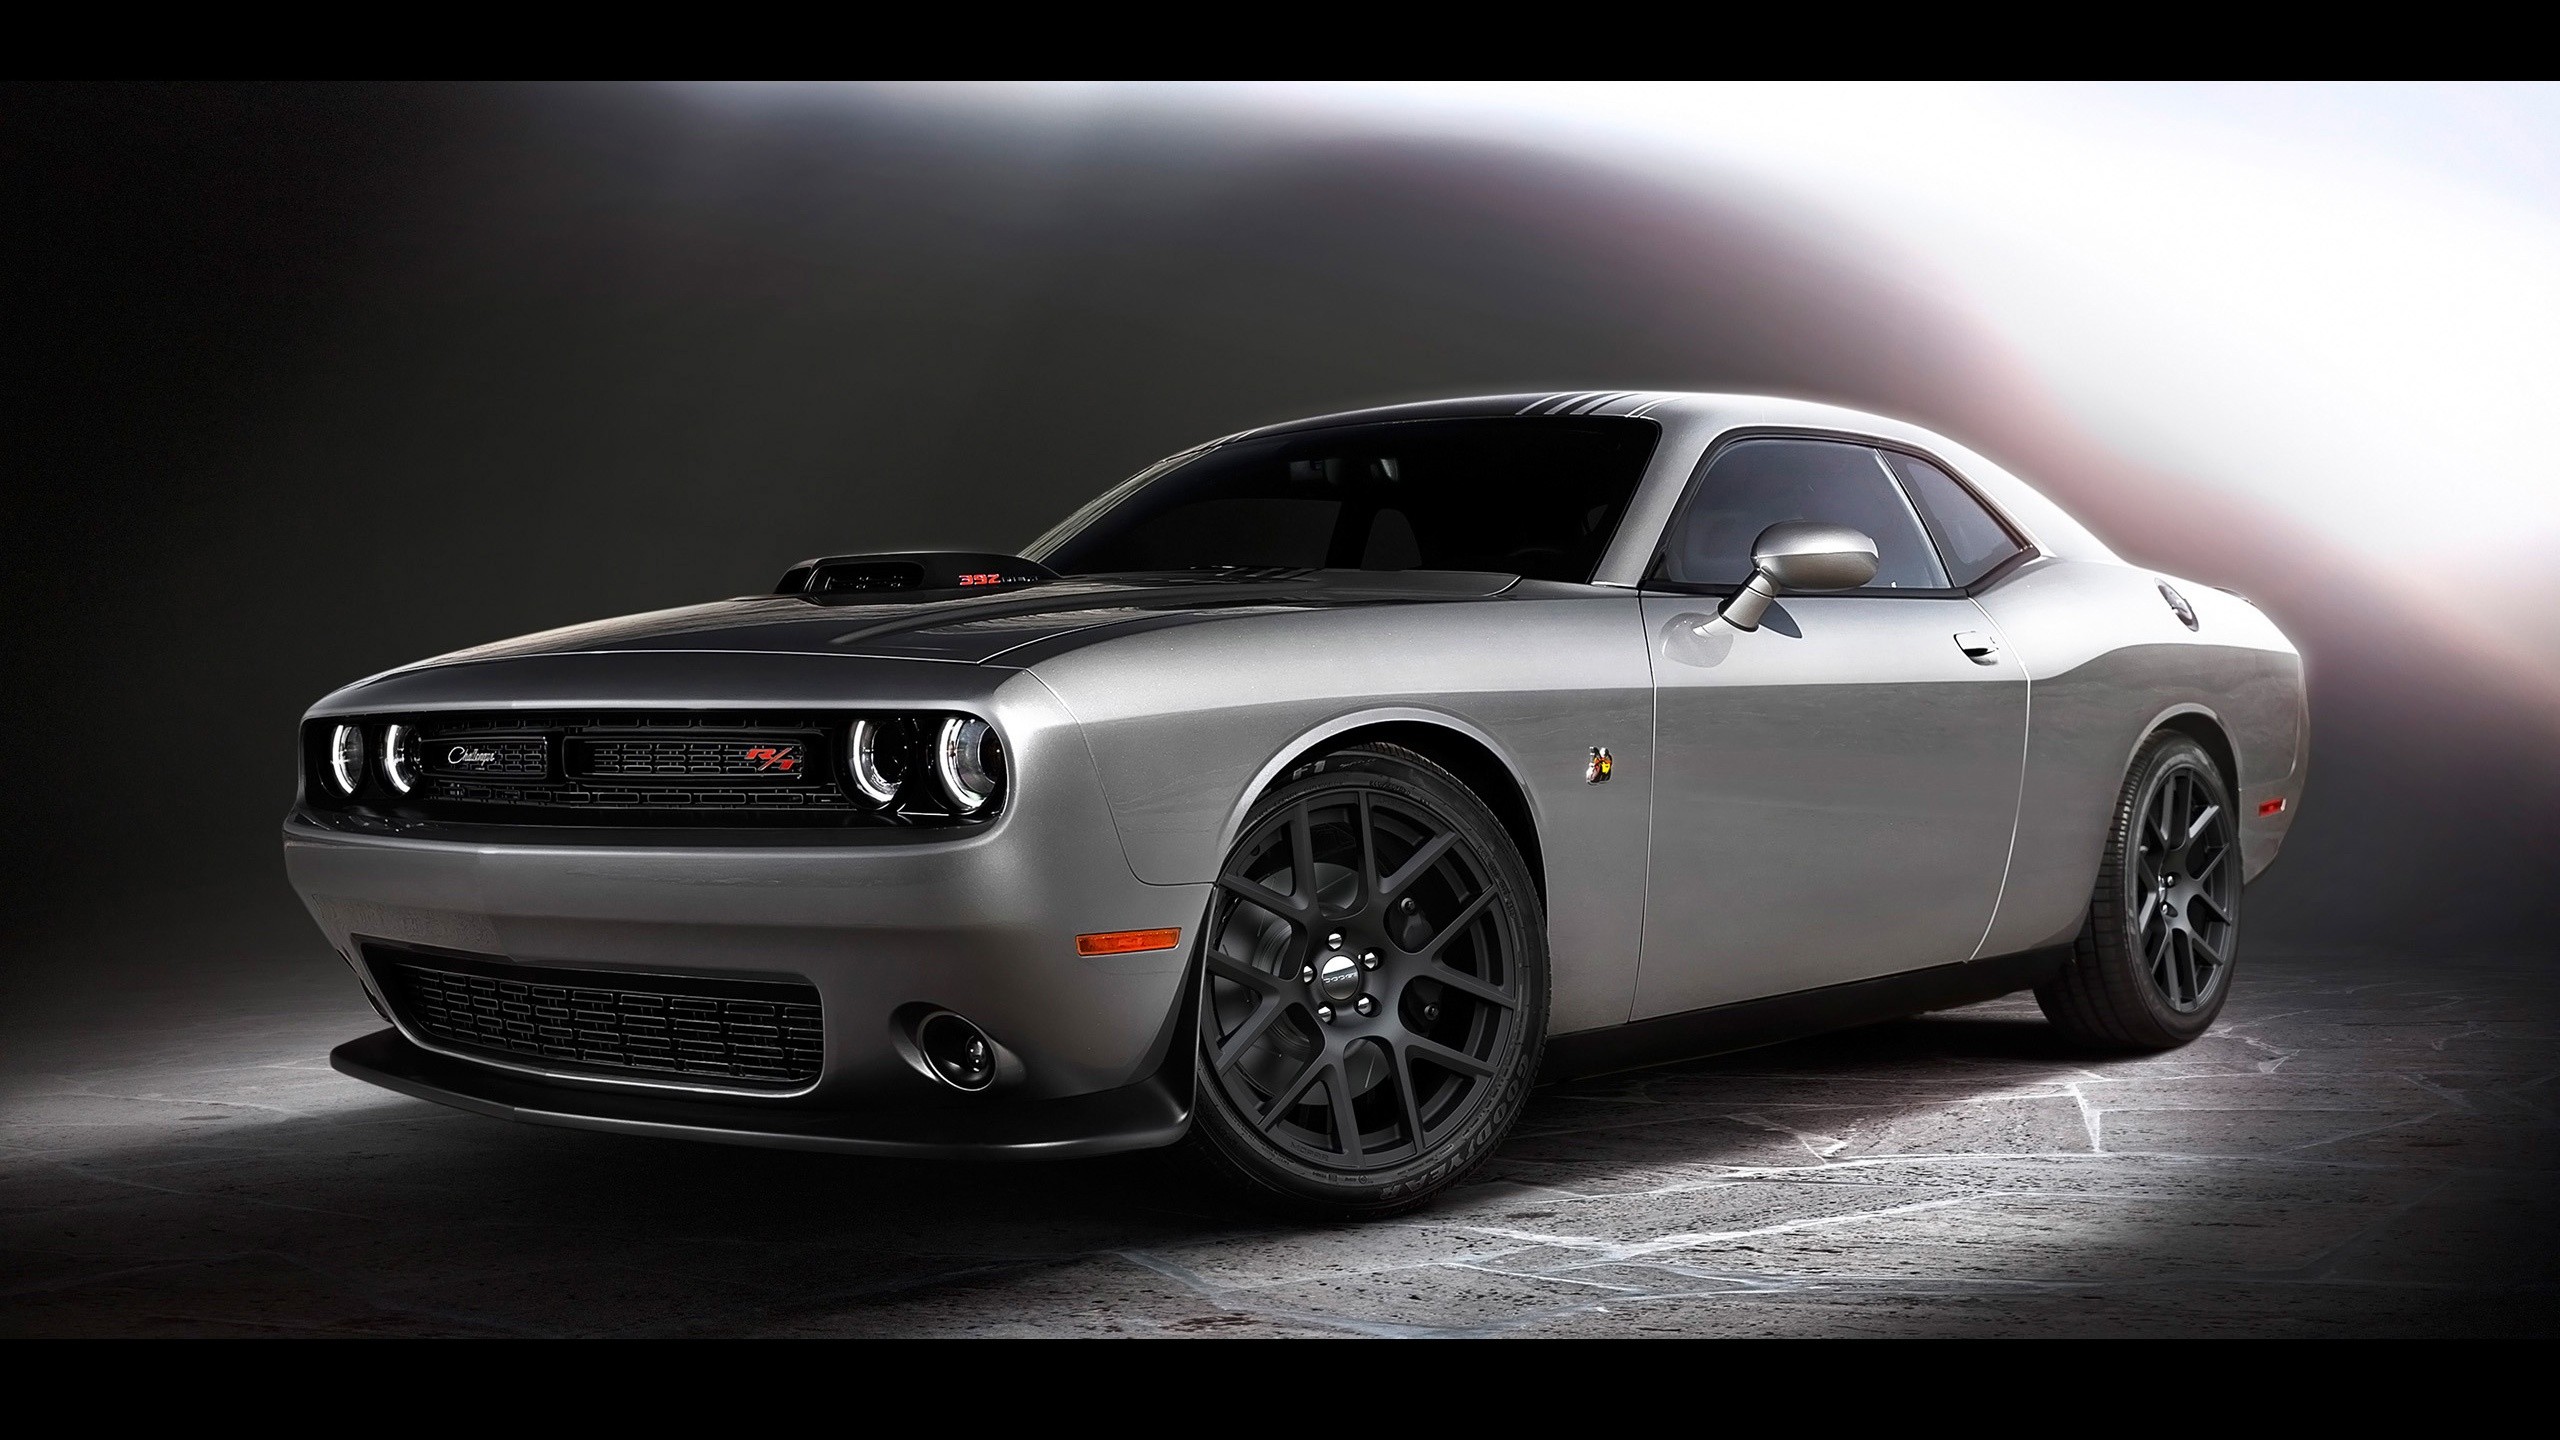 General 2560x1440 Dodge Challenger Dodge silver cars vehicle muscle cars American cars Stellantis car